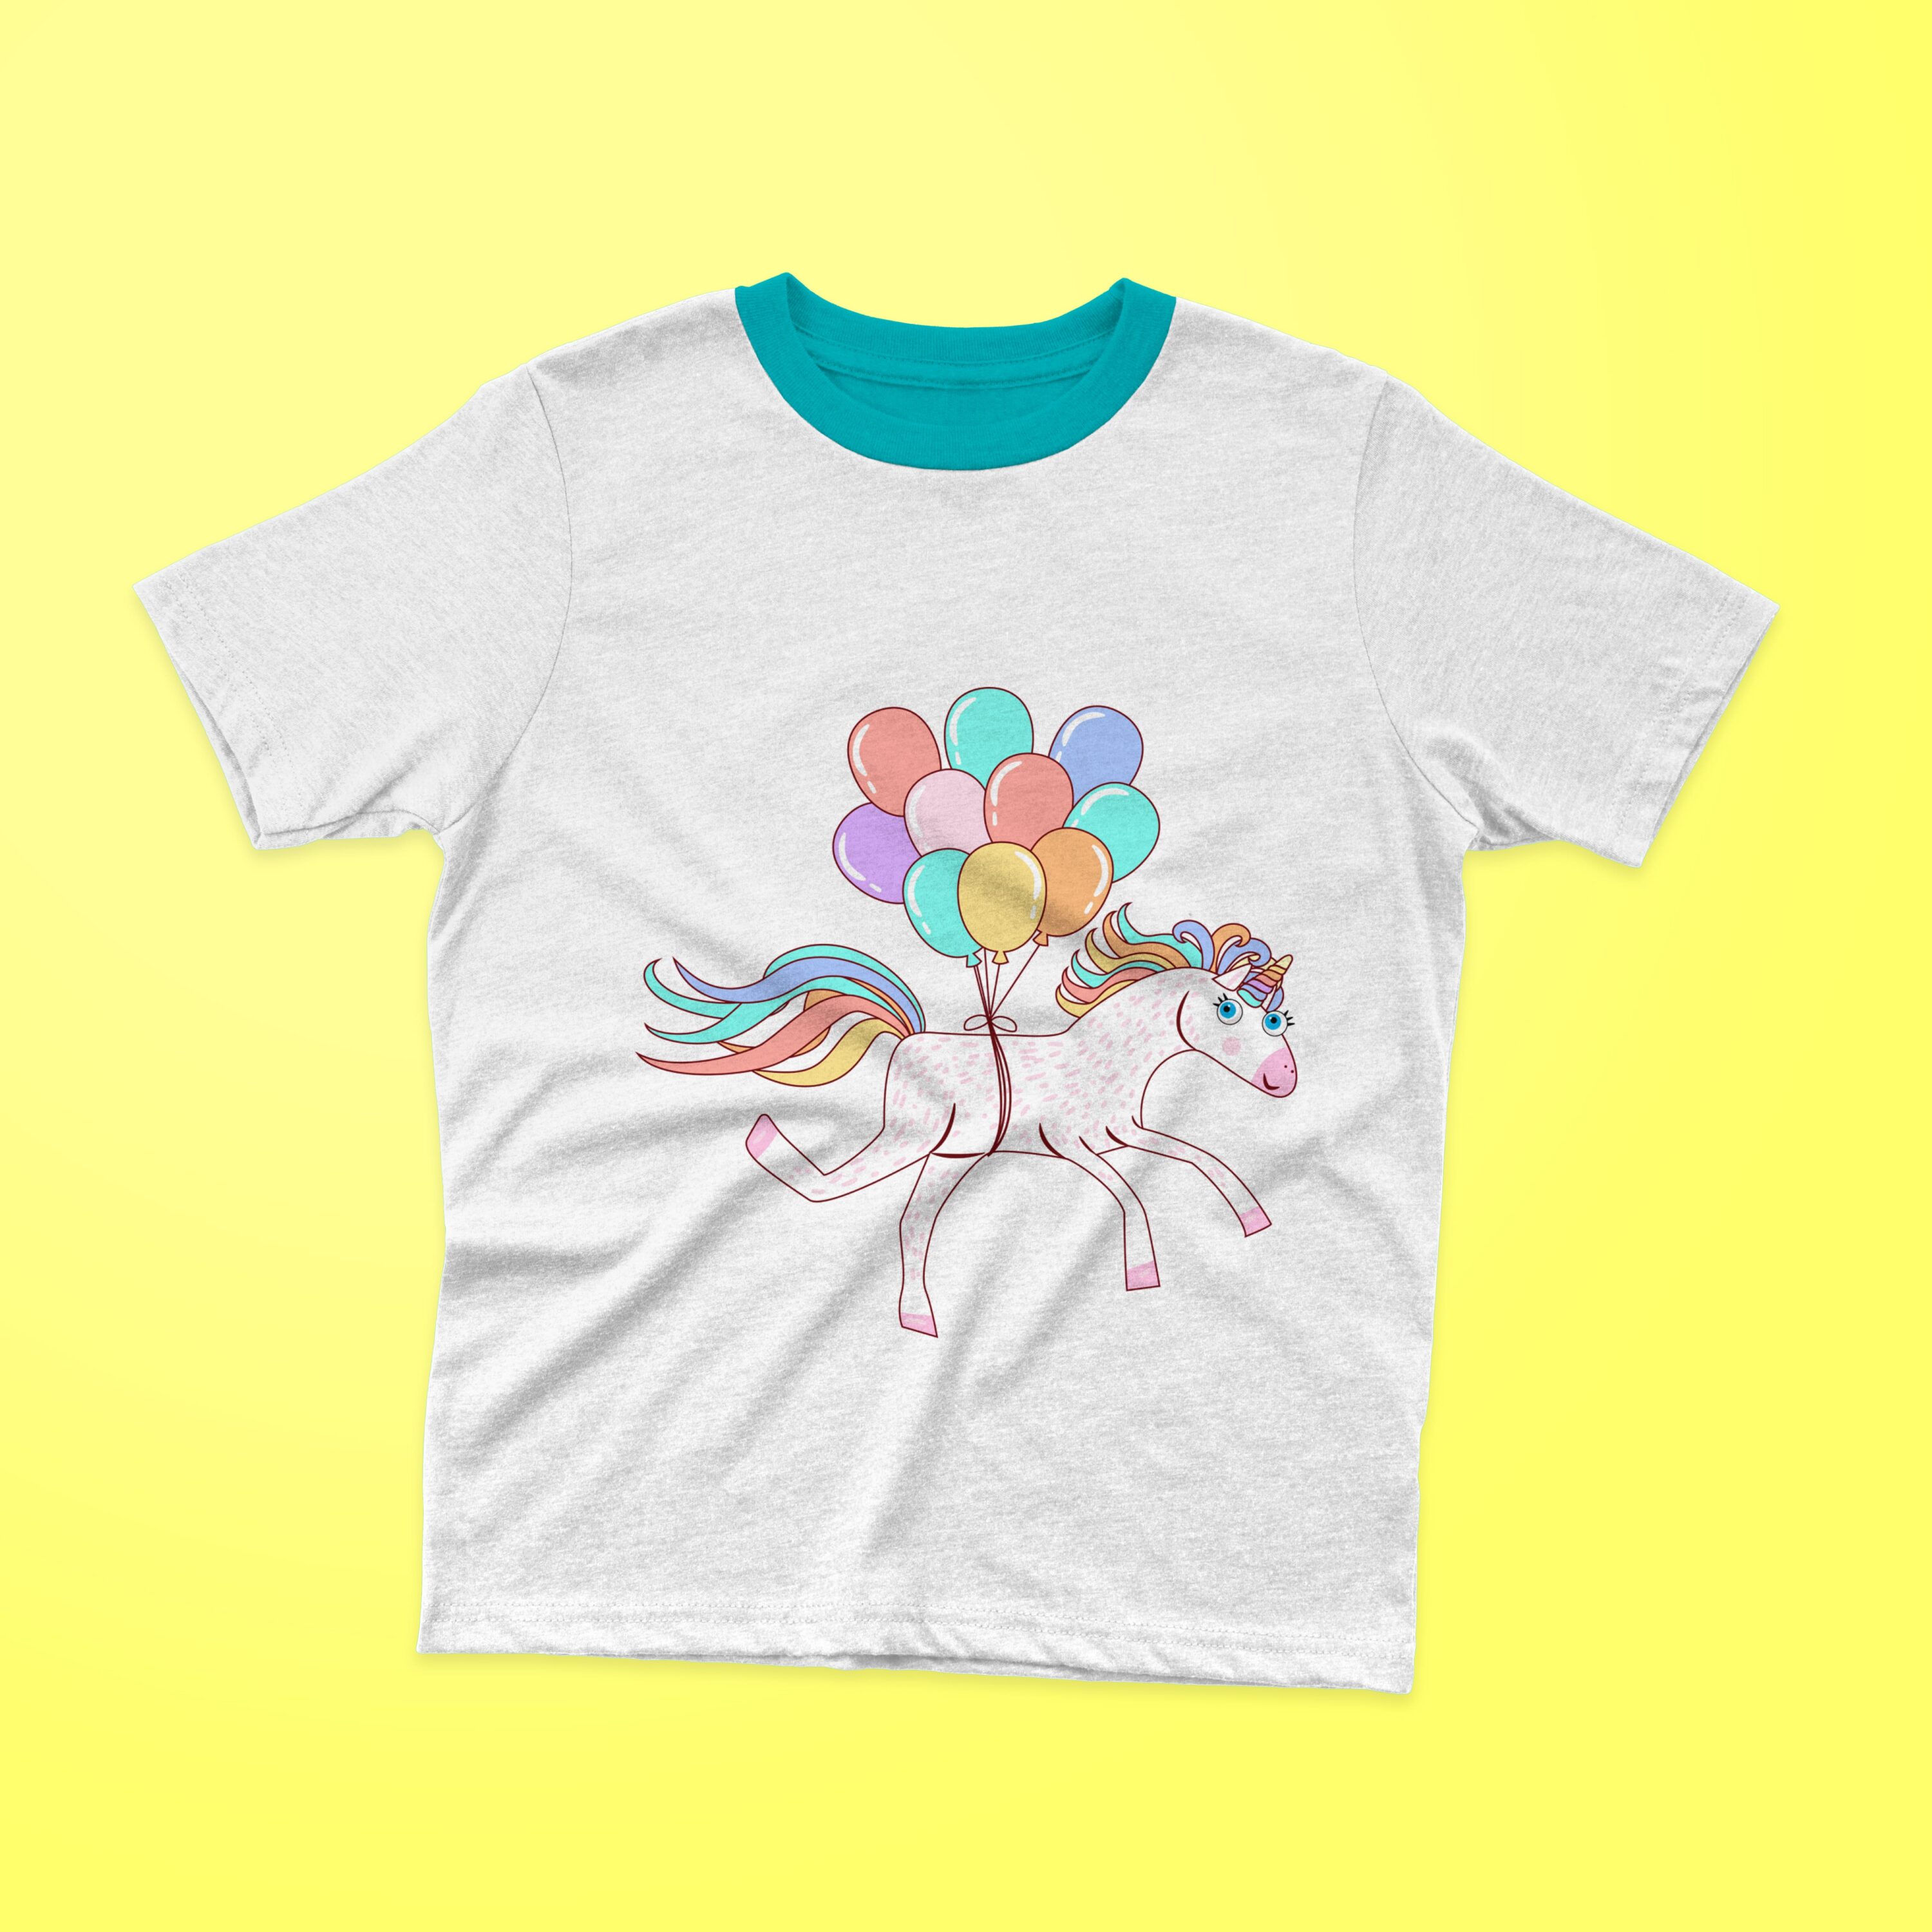 White t-shirt with a turquoise collar and a flying unicorn with colorful balloons on a yellow background.